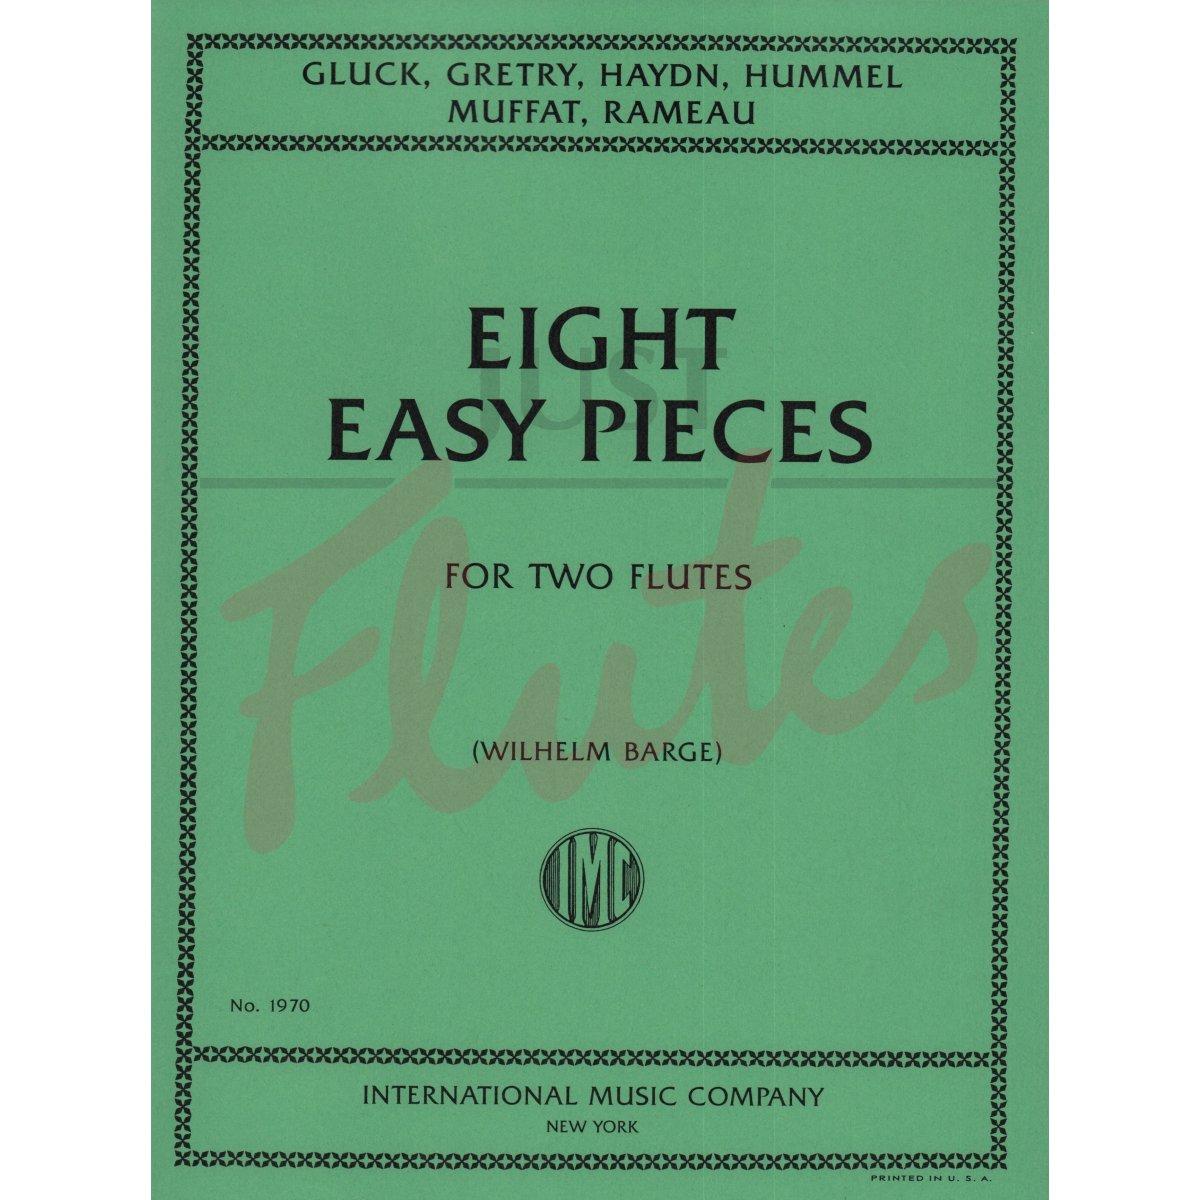 Eight Easy Pieces by Classical Composers for Two Flutes